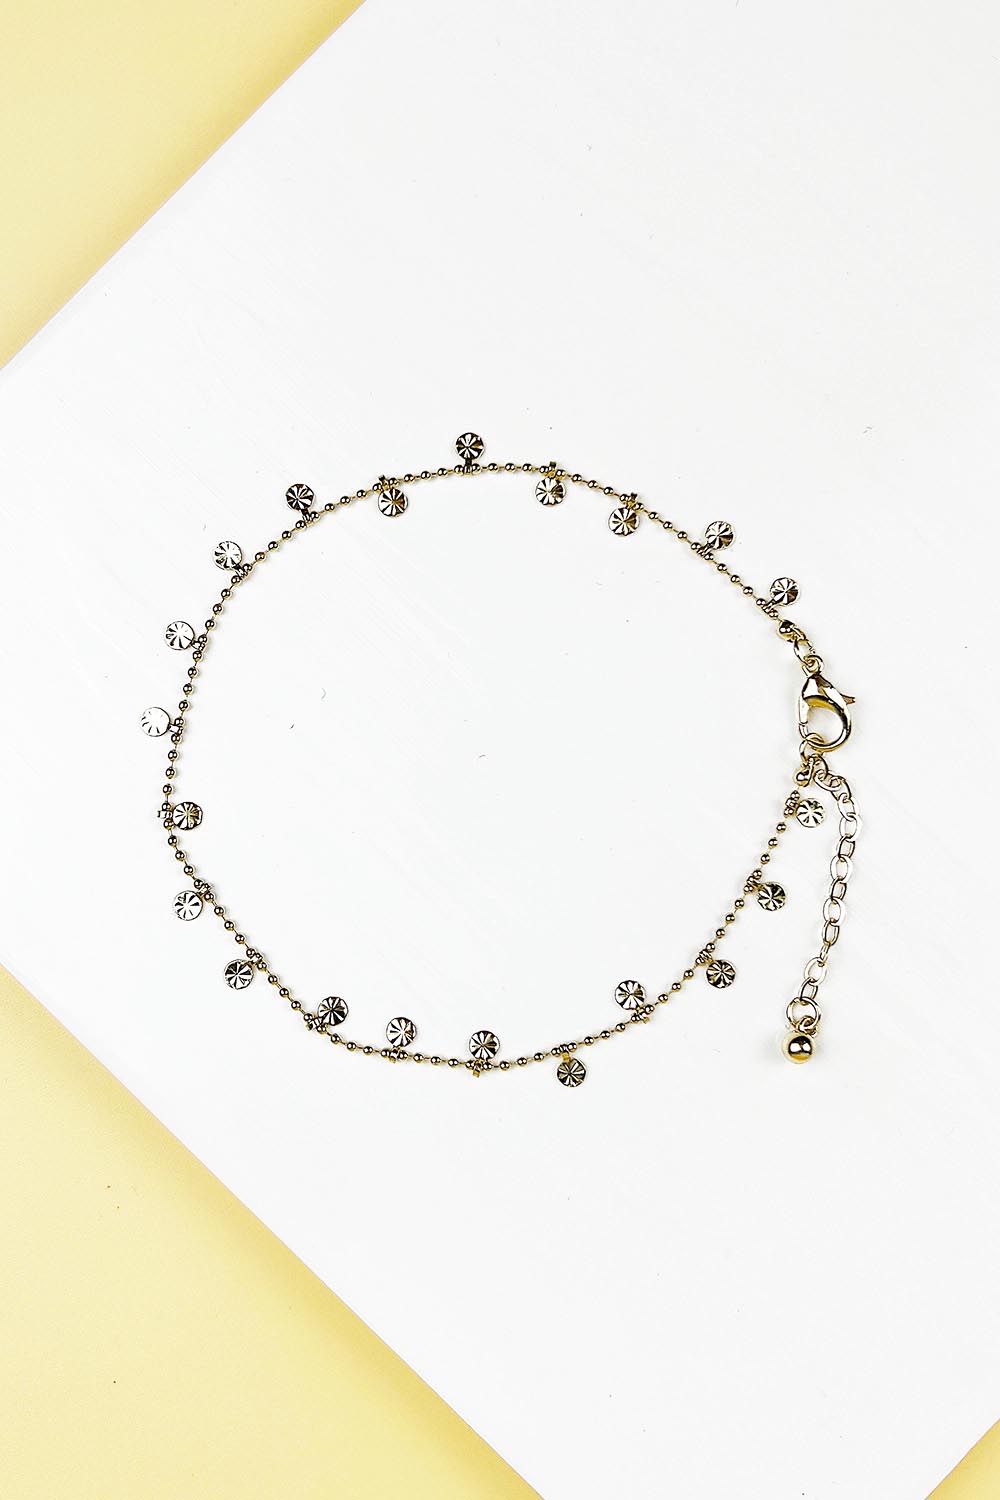 9" ROUND SHAPED BRASS METAL CHAIN ANKLET